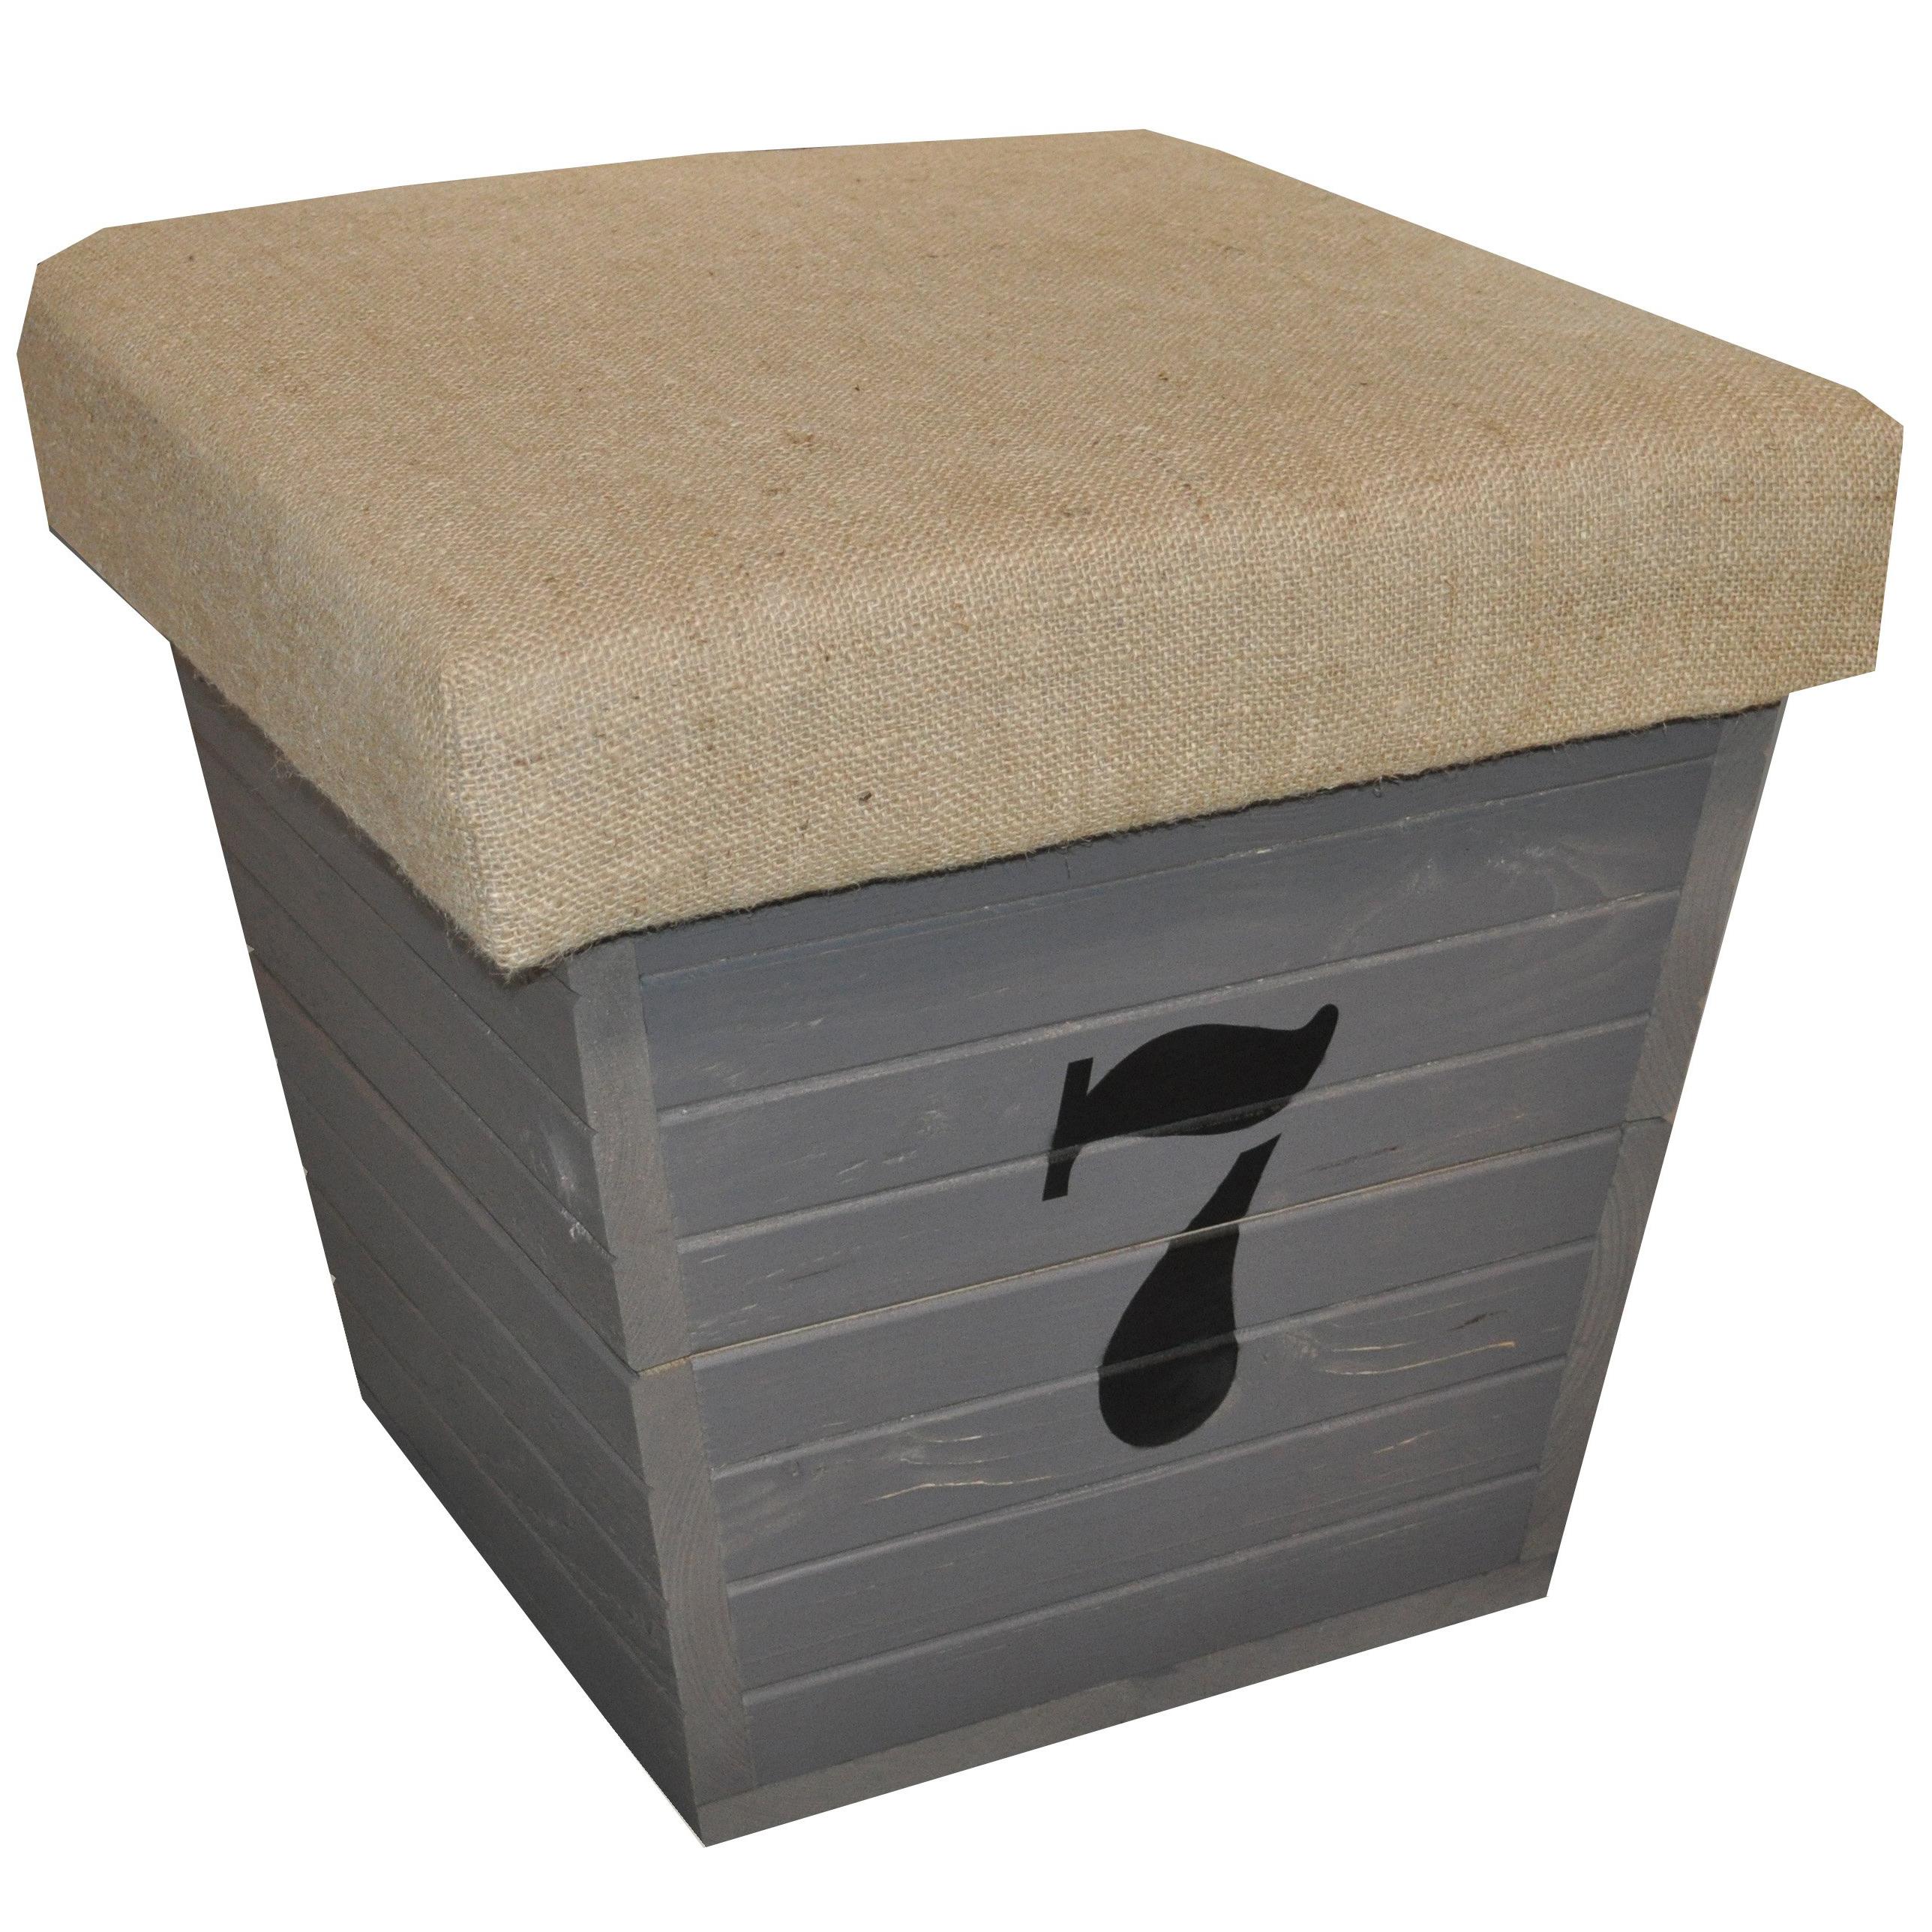 Storage Box / Seat with Number For Sale